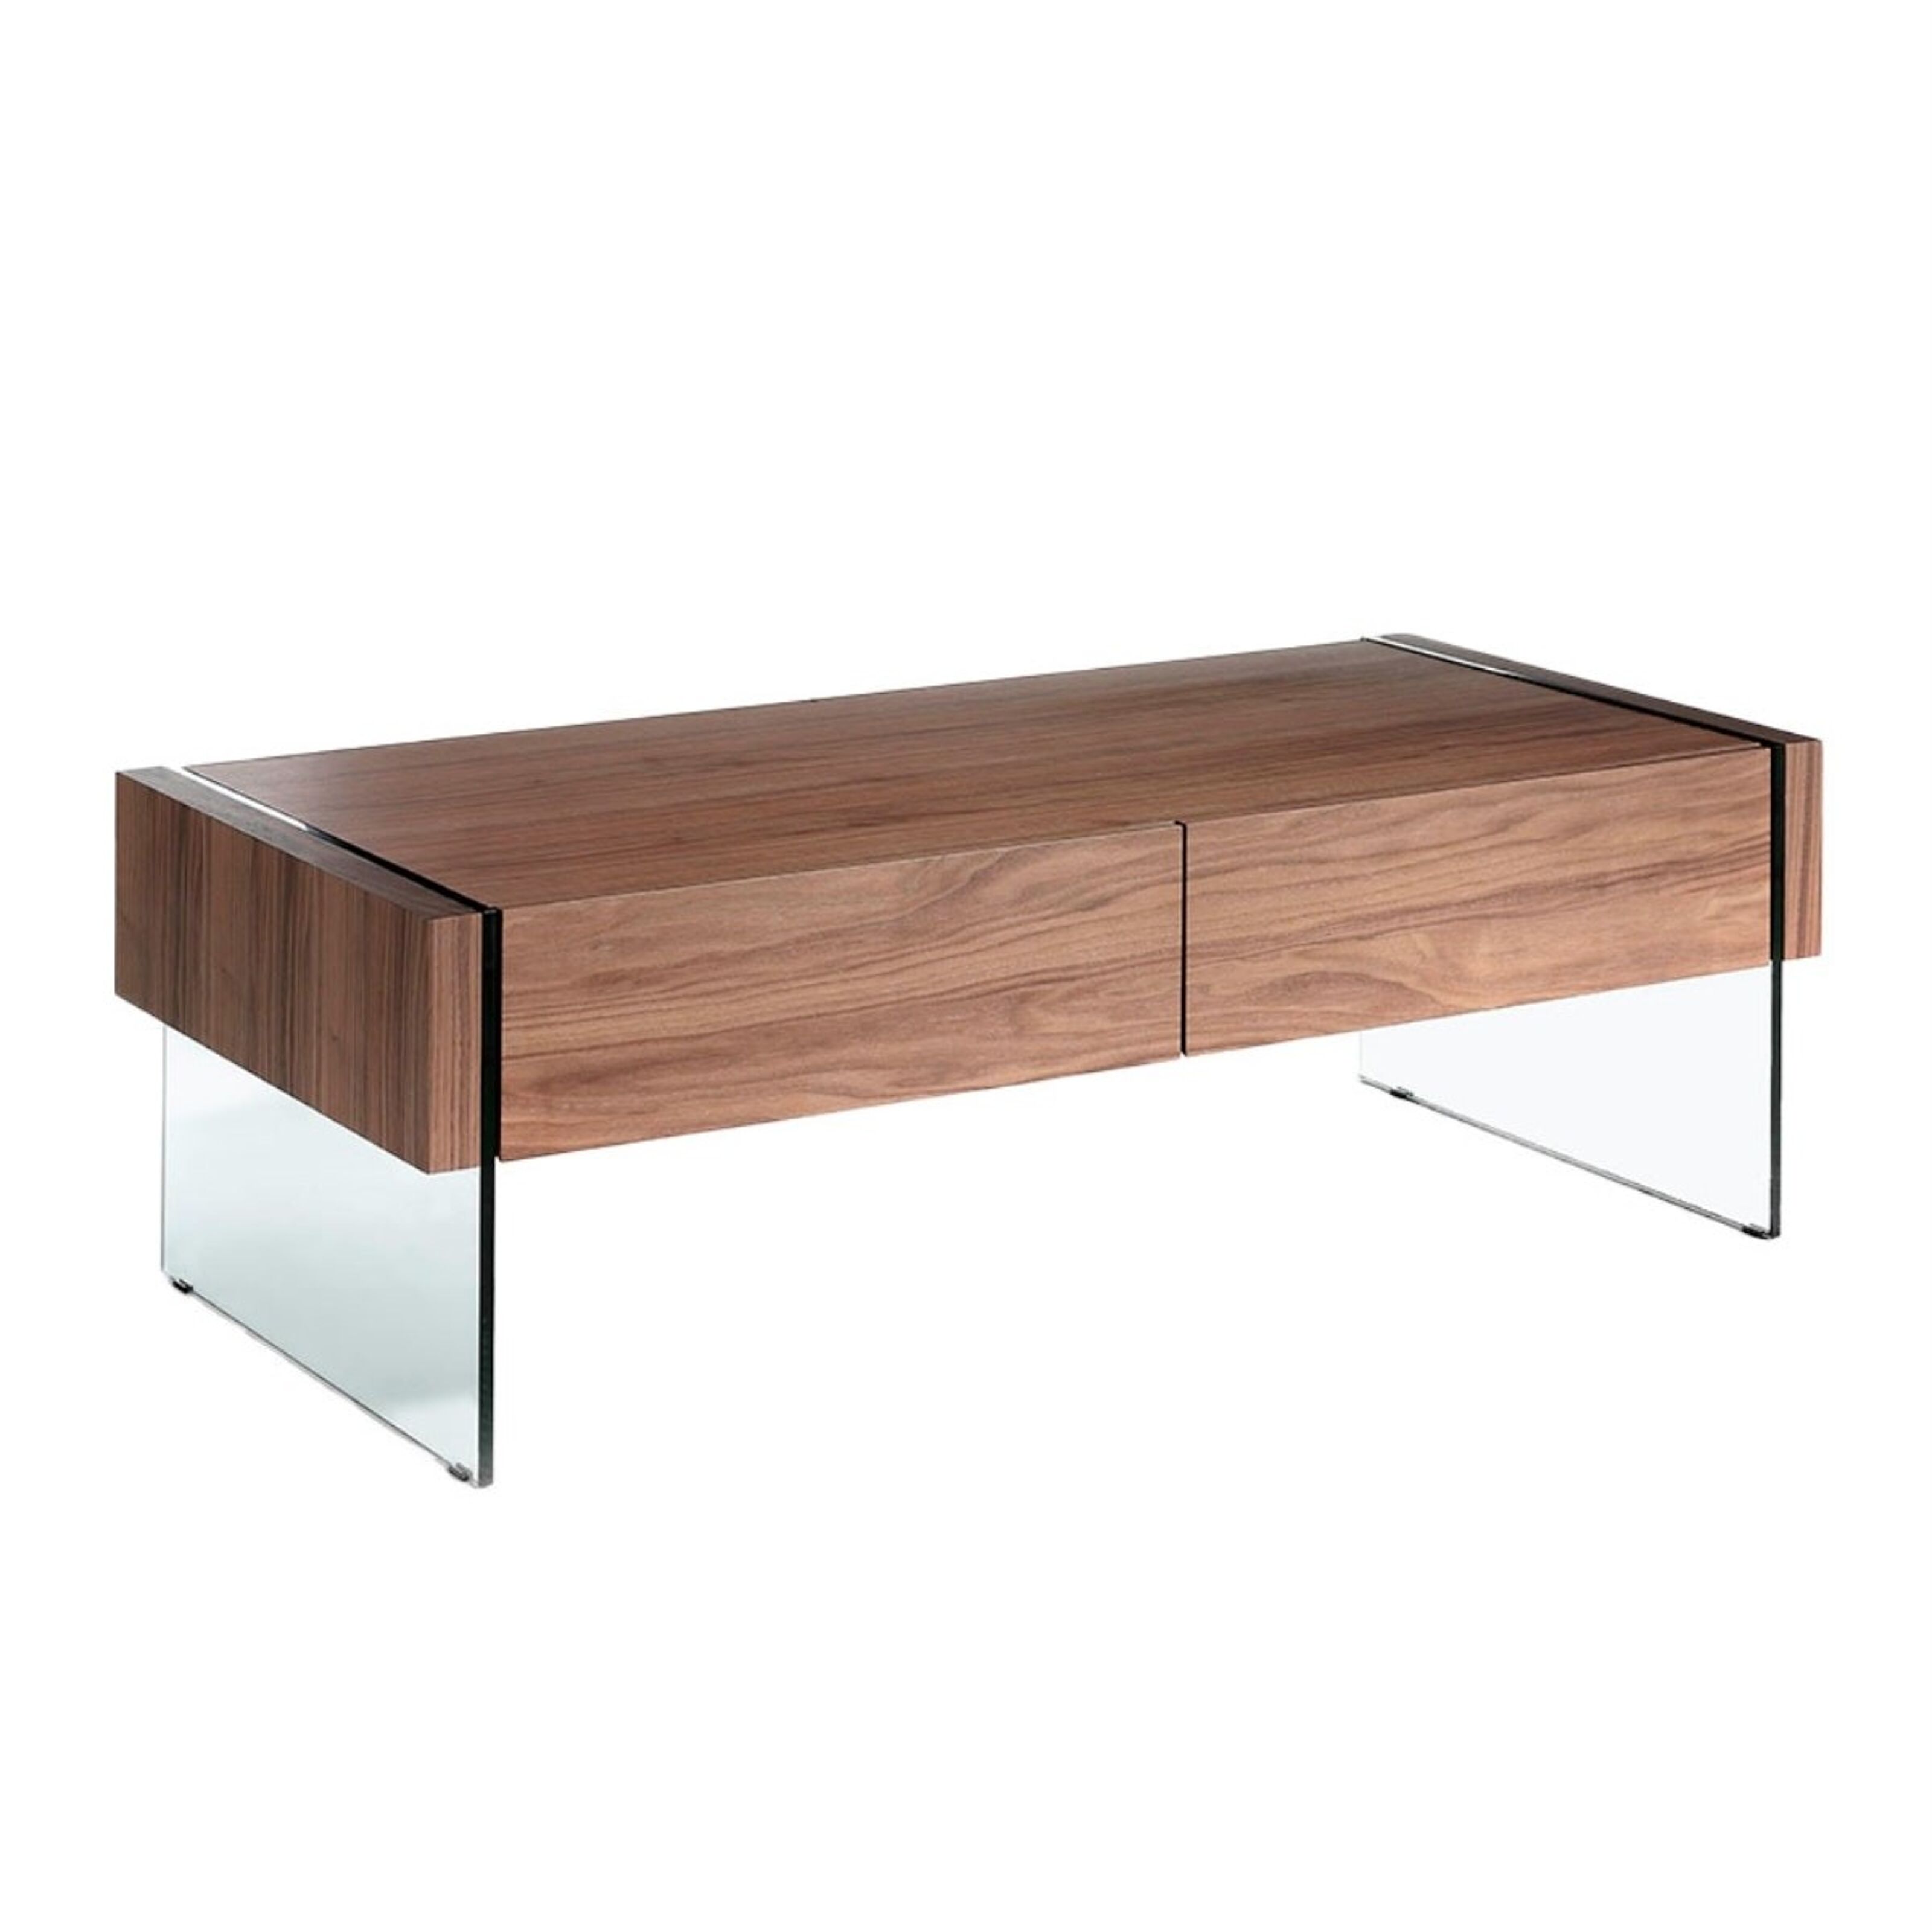 Buy wholesale Walnut veneered wood glass drawers, table with model 2050 sides tempered and center